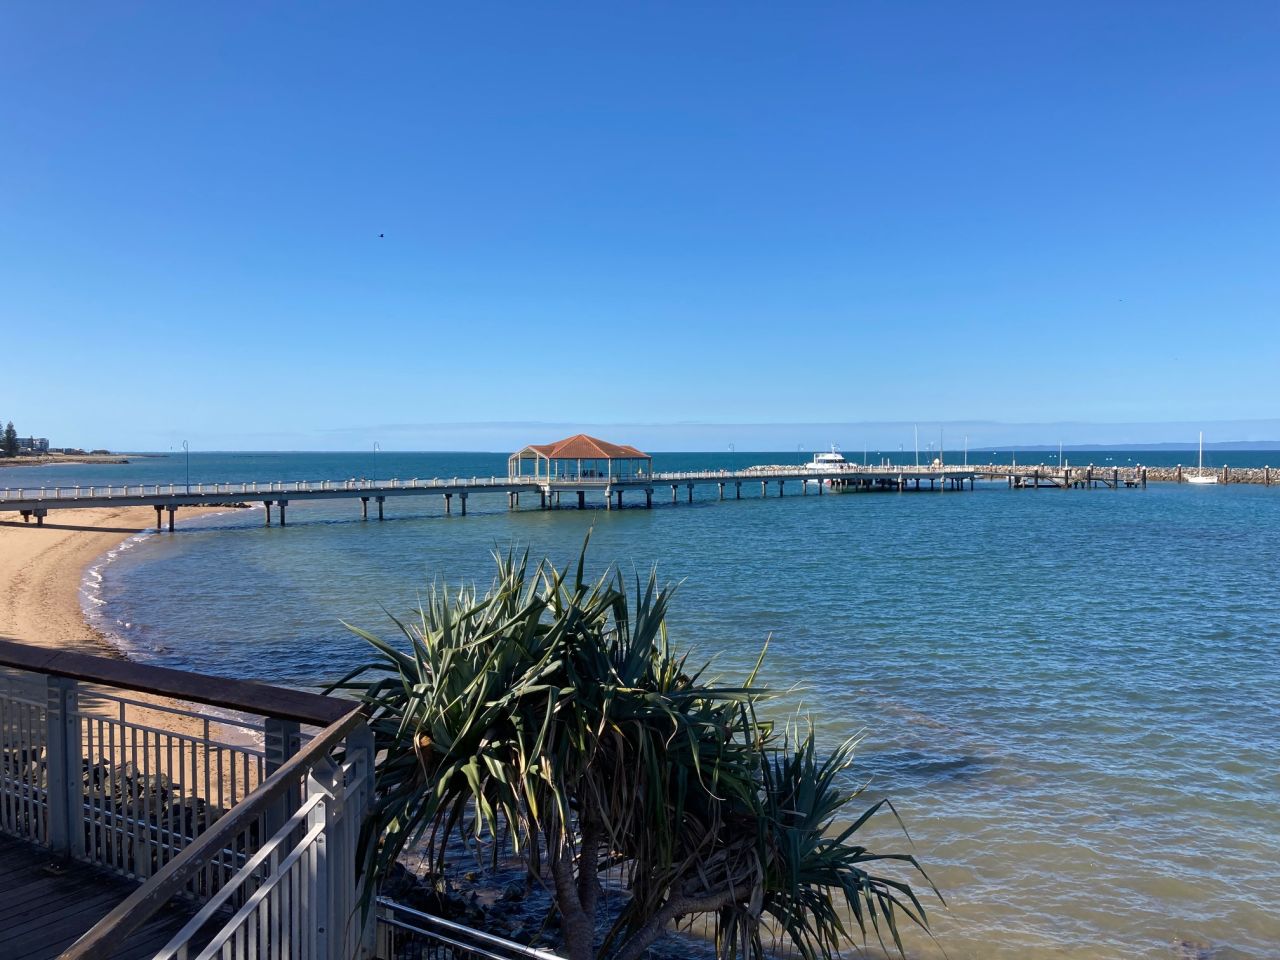 Members and guests enjoyed the foreshore views of Redcliffe jetty during a day outing in Sept 2021